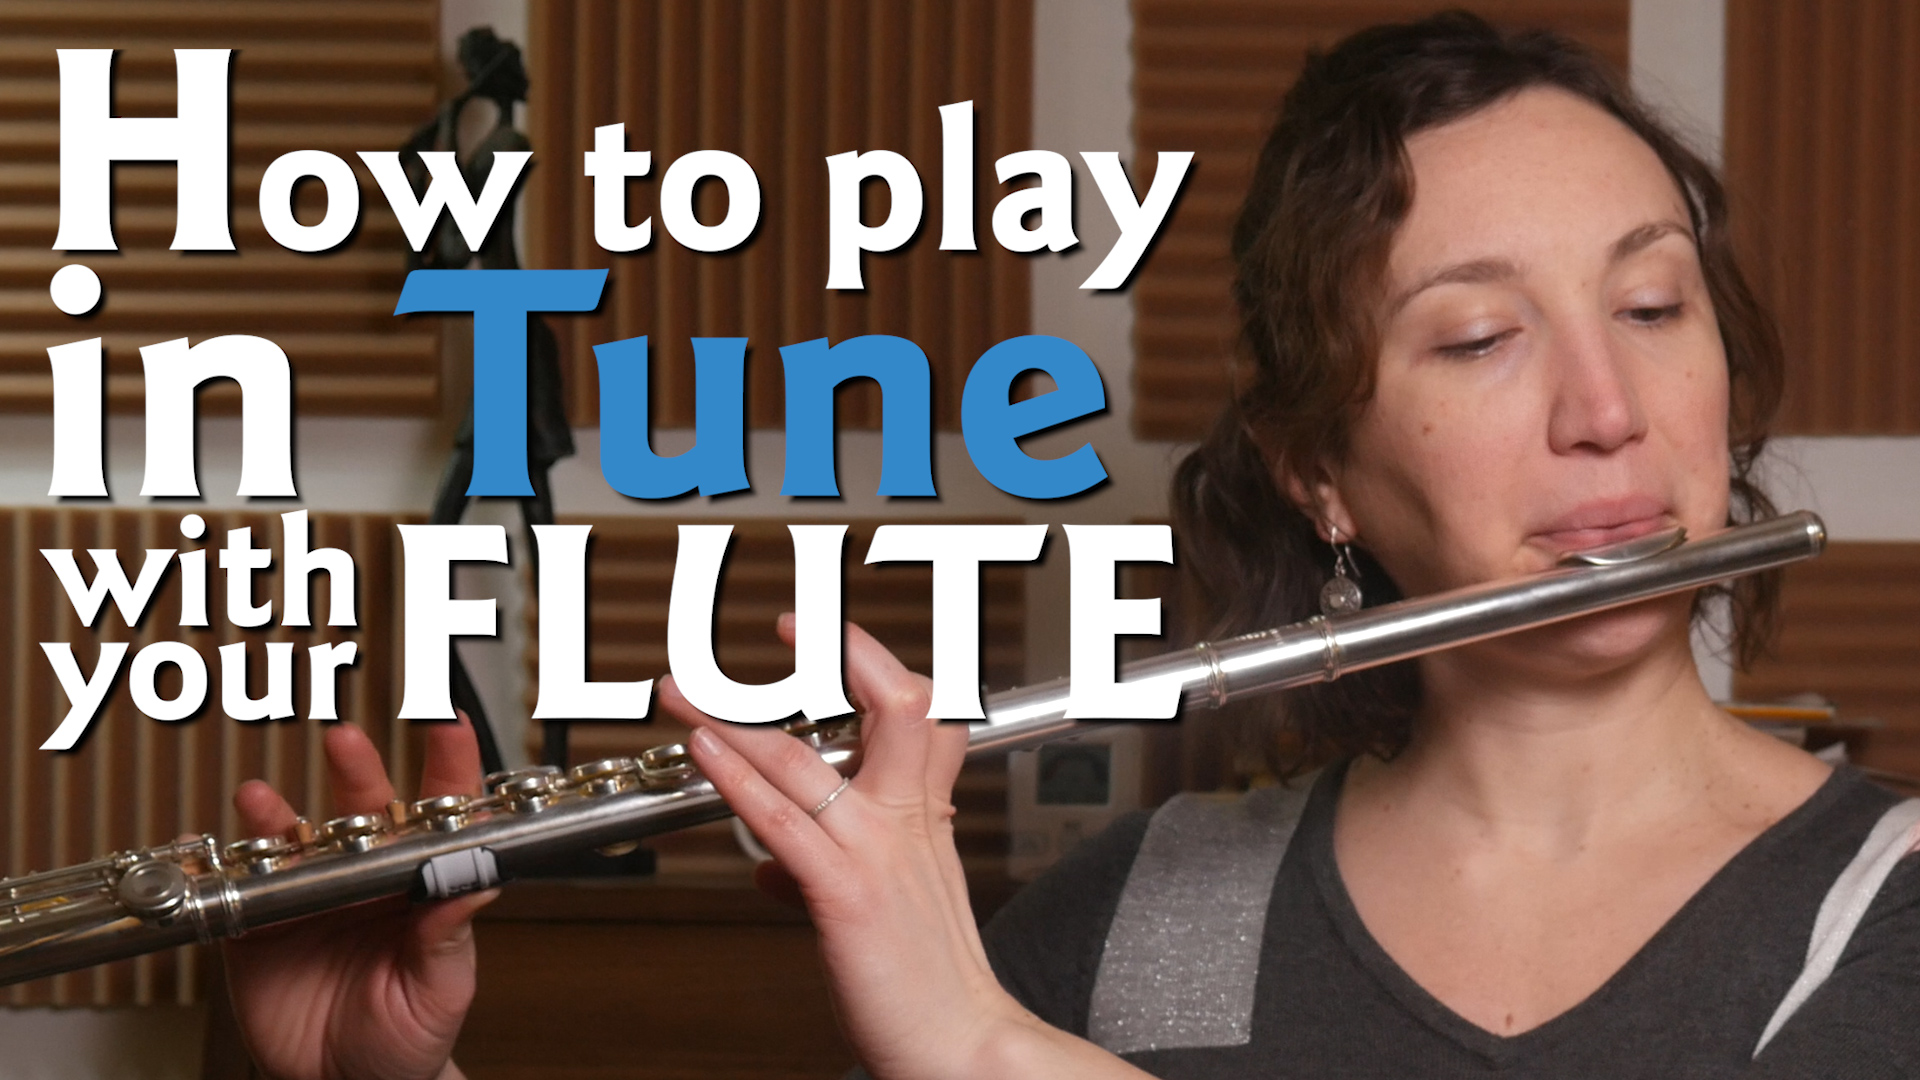 How to Play the Flute. The Flute Tune. Playing Flute. A playwright a Flute. Play the flute